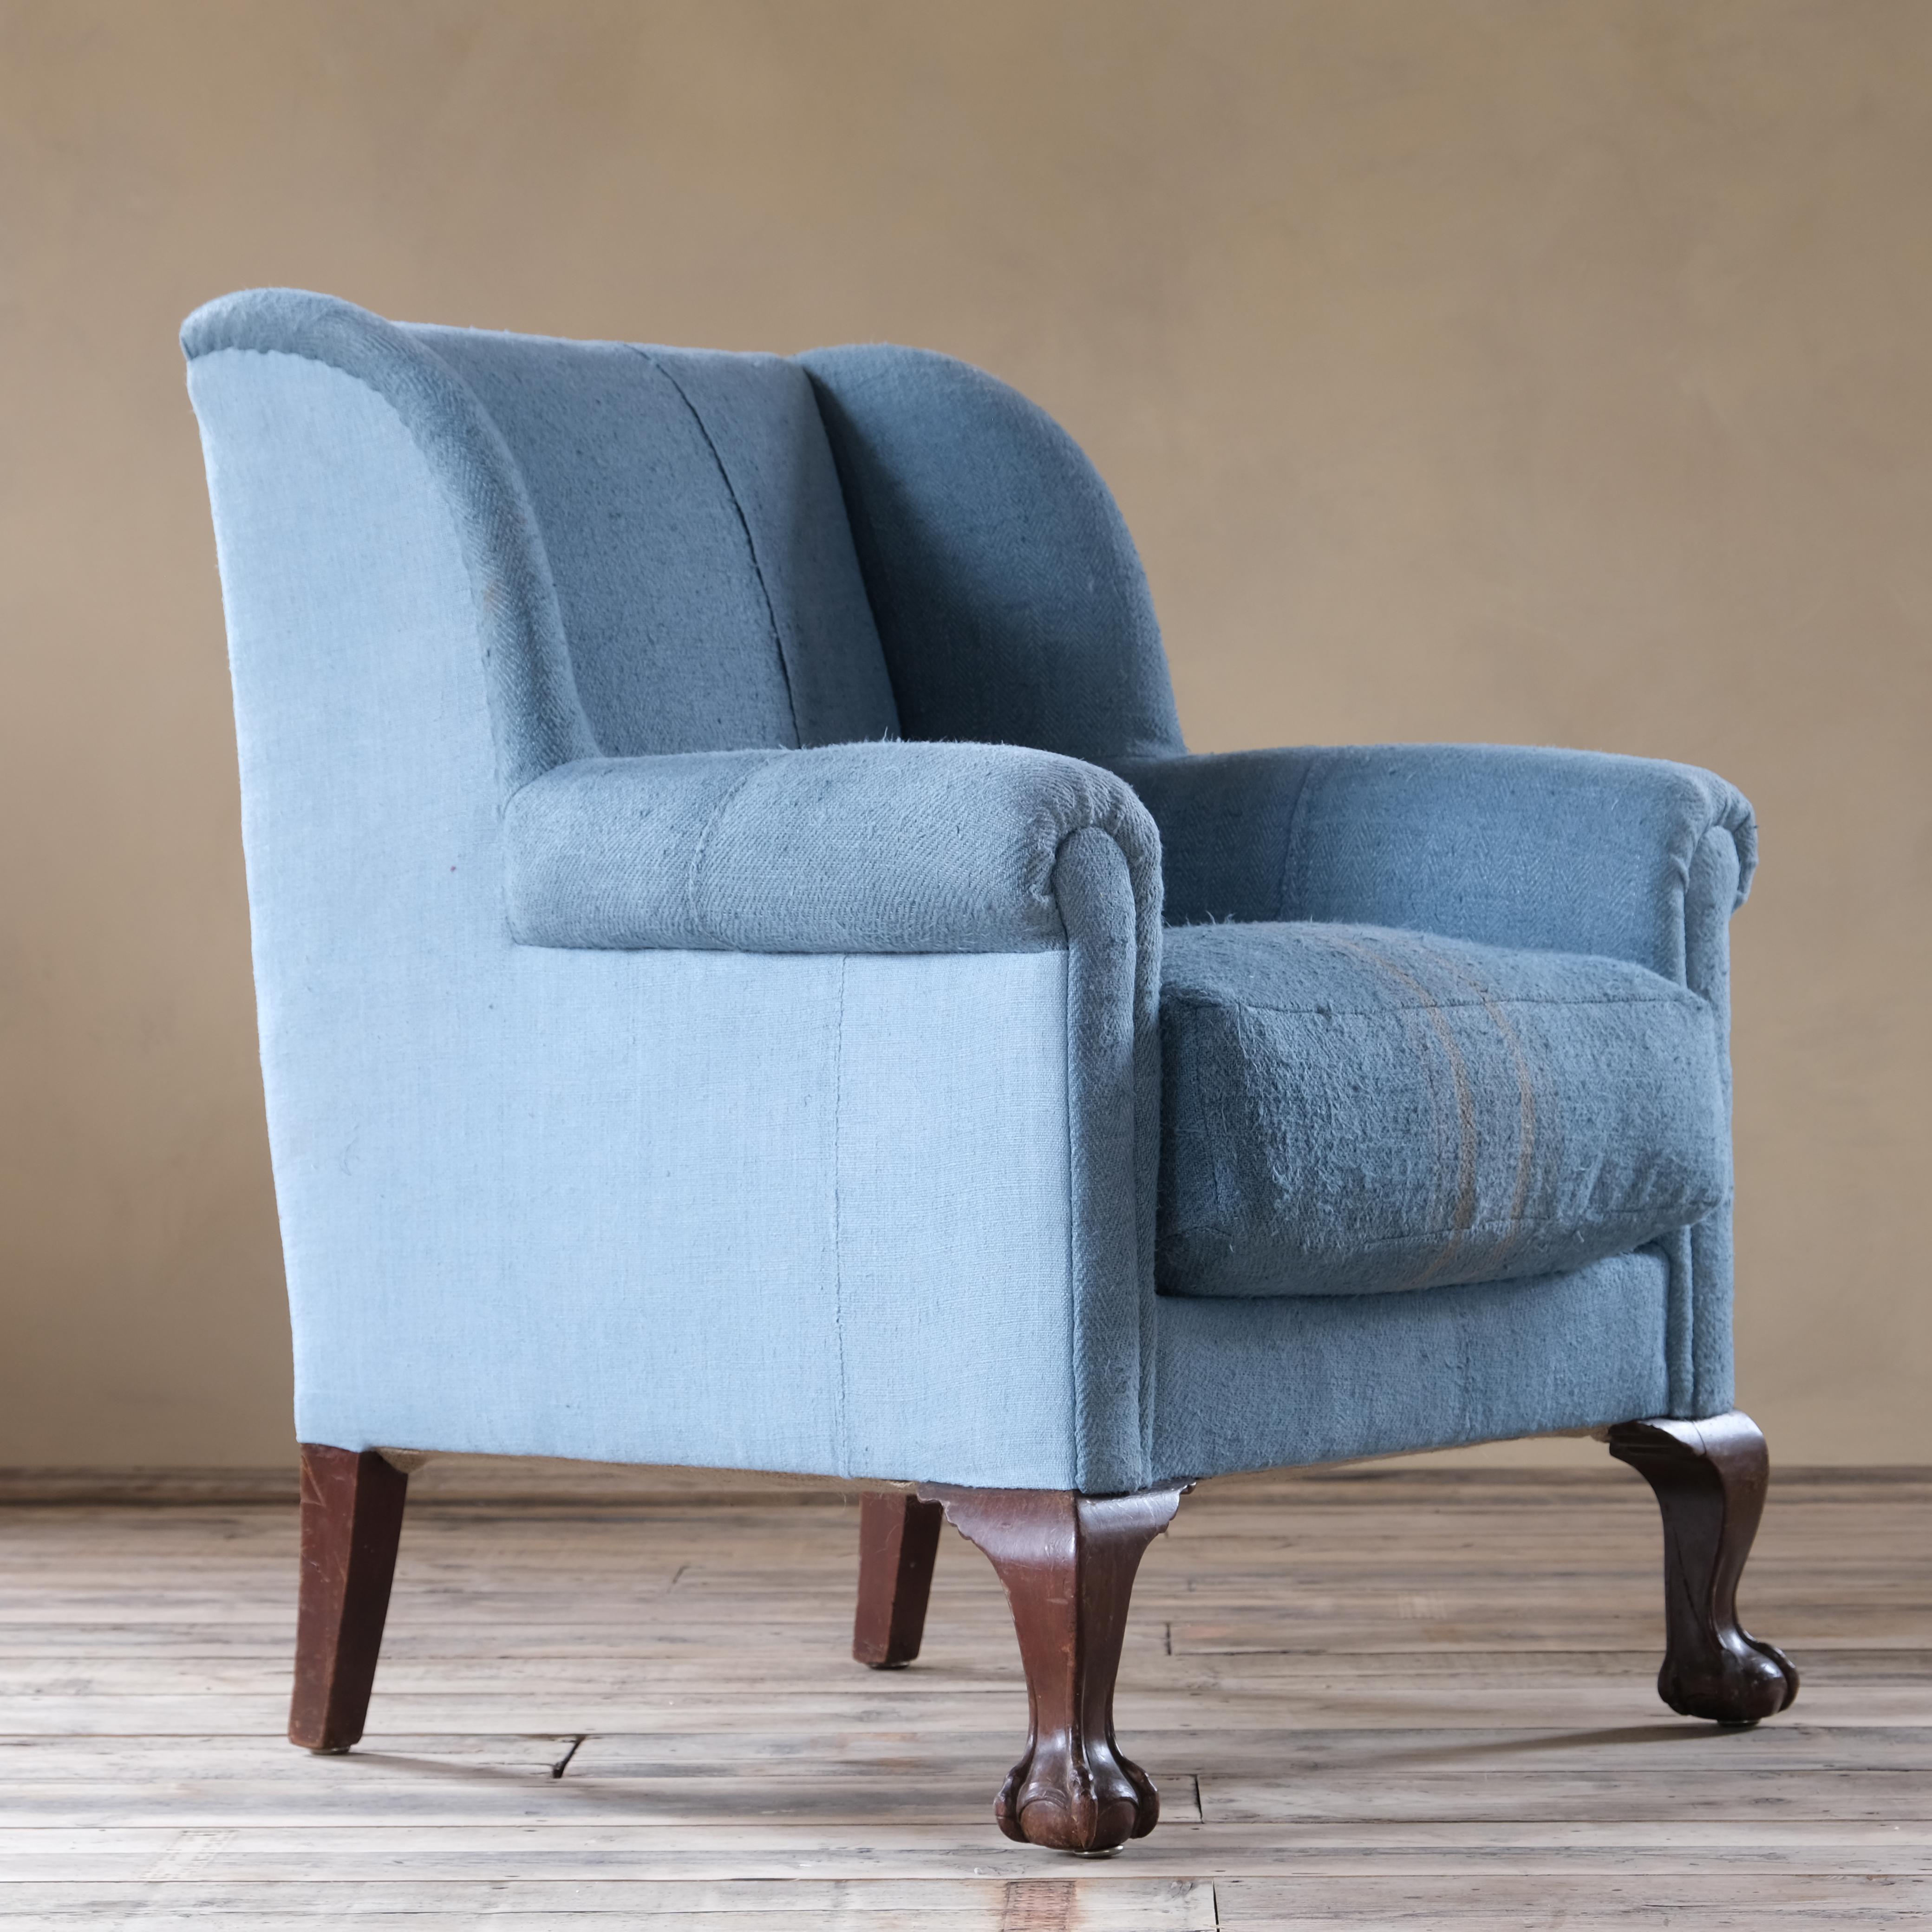 An early 20th century wingback armchair raised on mahogany ball and claw front legs and upholstered in sky blue contrasting antique grain sacks hand dyed using traditional methods. 

81cm wide
81cm deep
95cm high
45cm seat height.